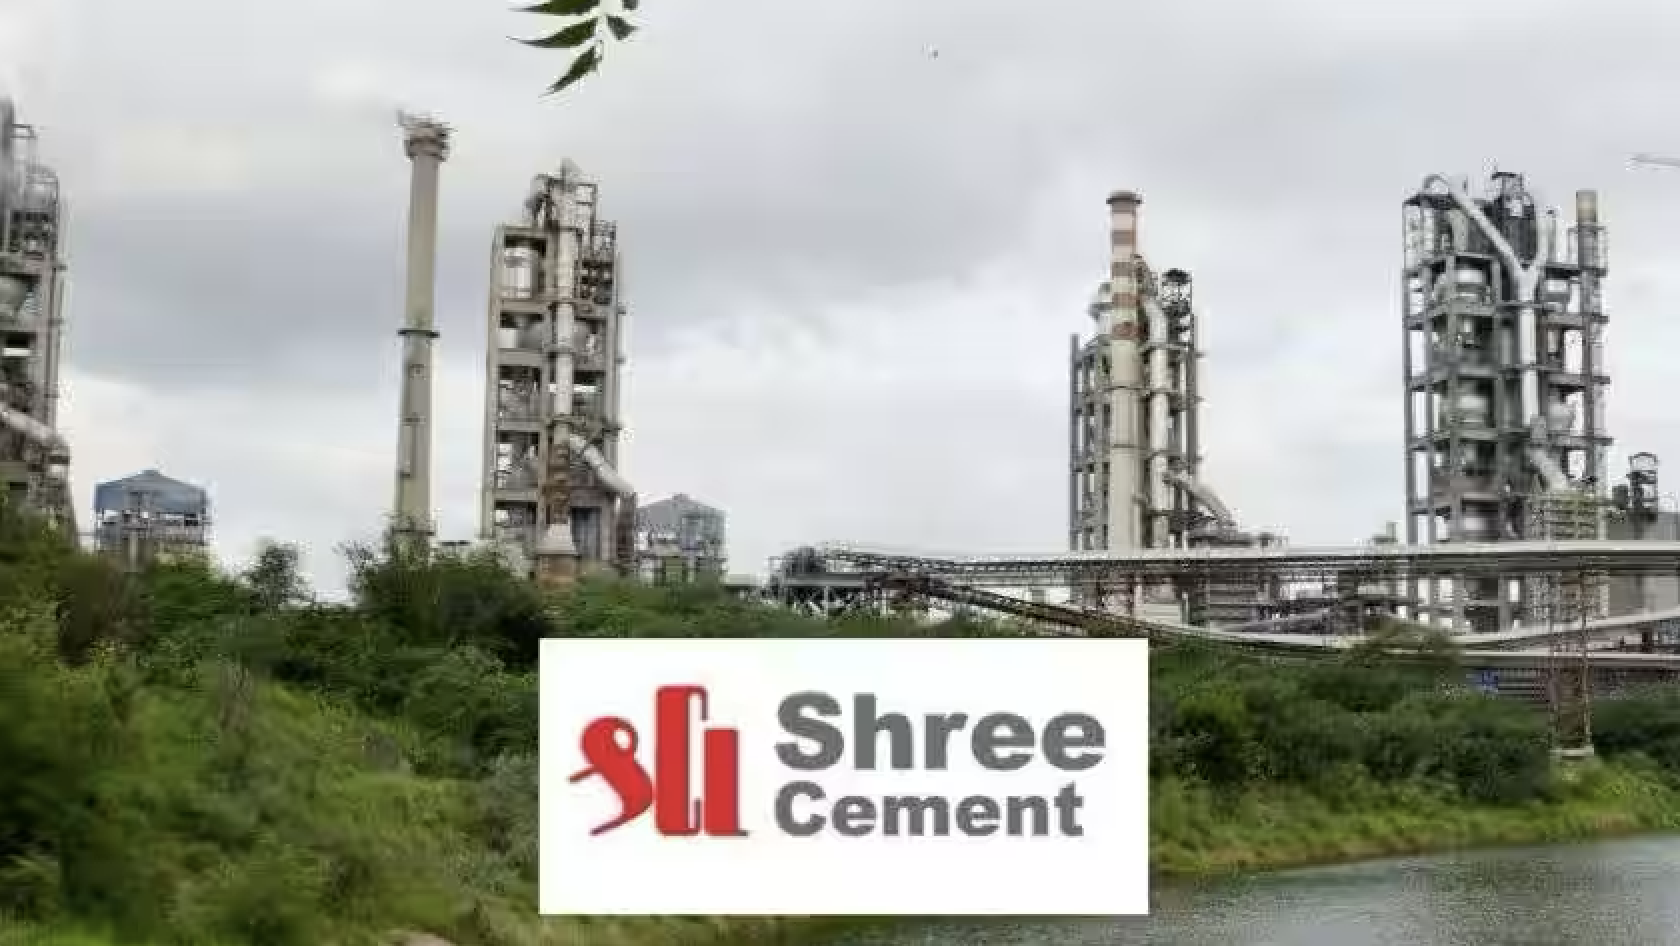 Shree Cement Unveils Ambitious Expansion Plans for Cement Capacity in Uttar Pradesh